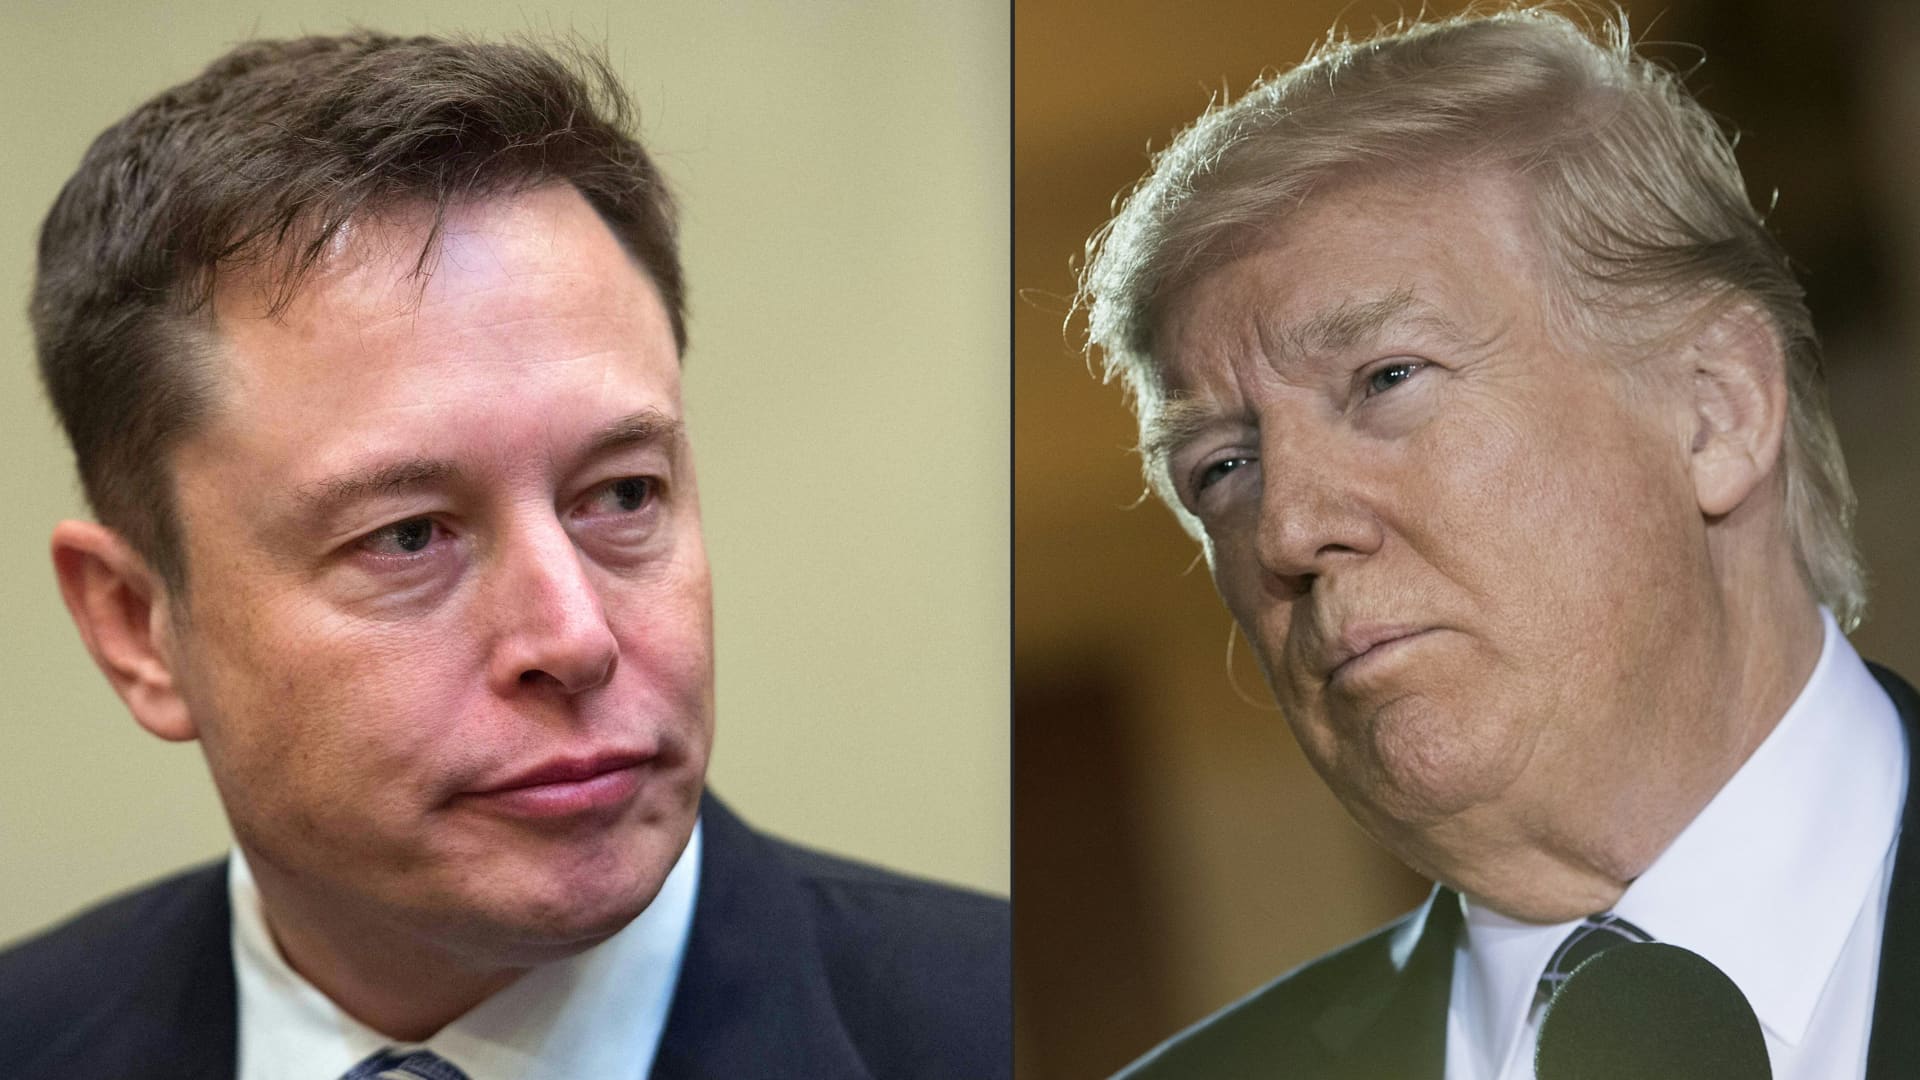 Elon Musk says Trump ‘came by’ while he was as soon as eating breakfast, did not search recordsdata from for money